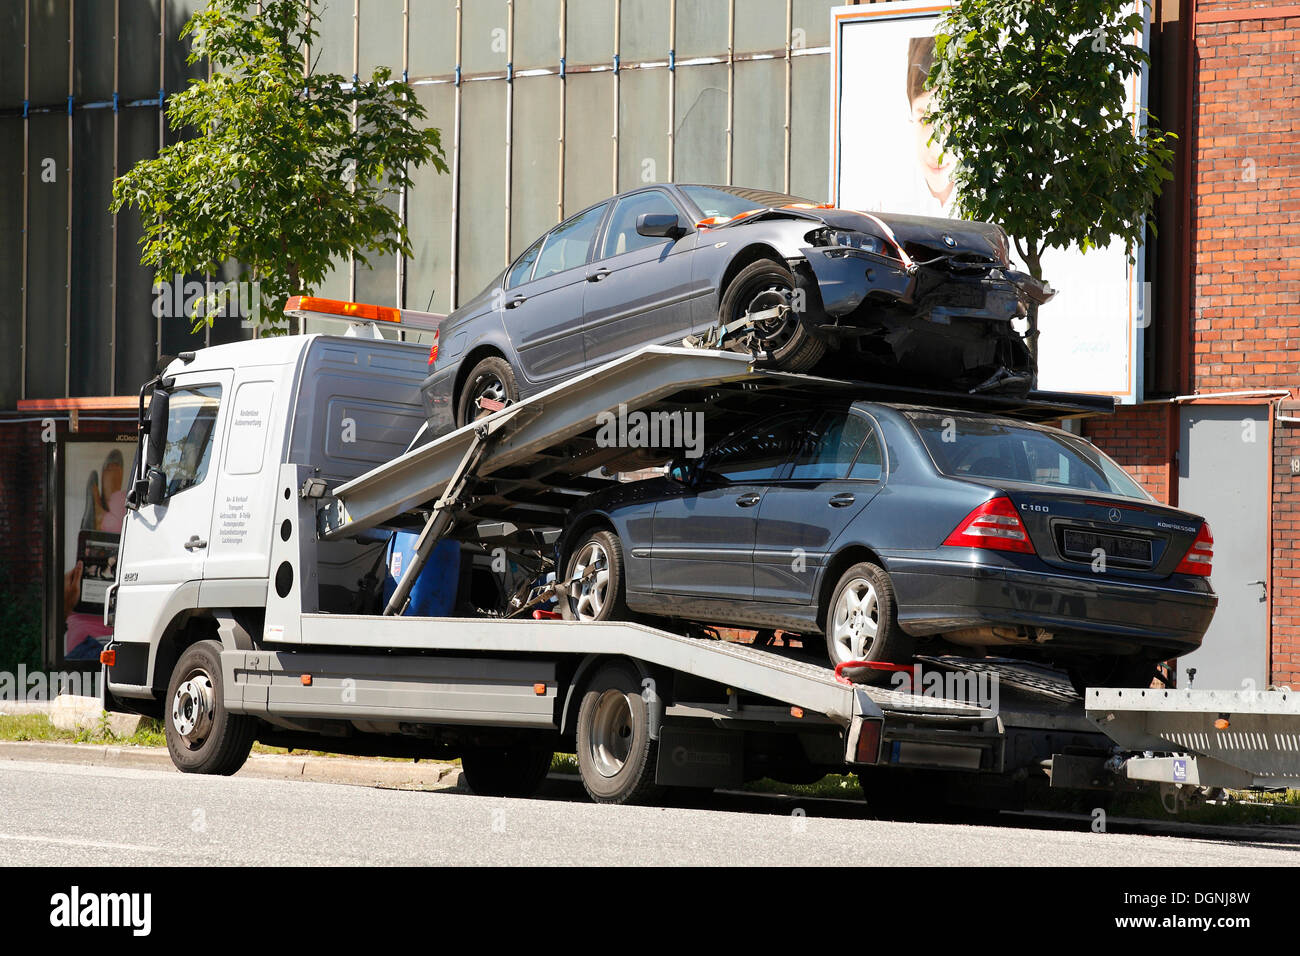 Car carrier, tow truck Stock Photo